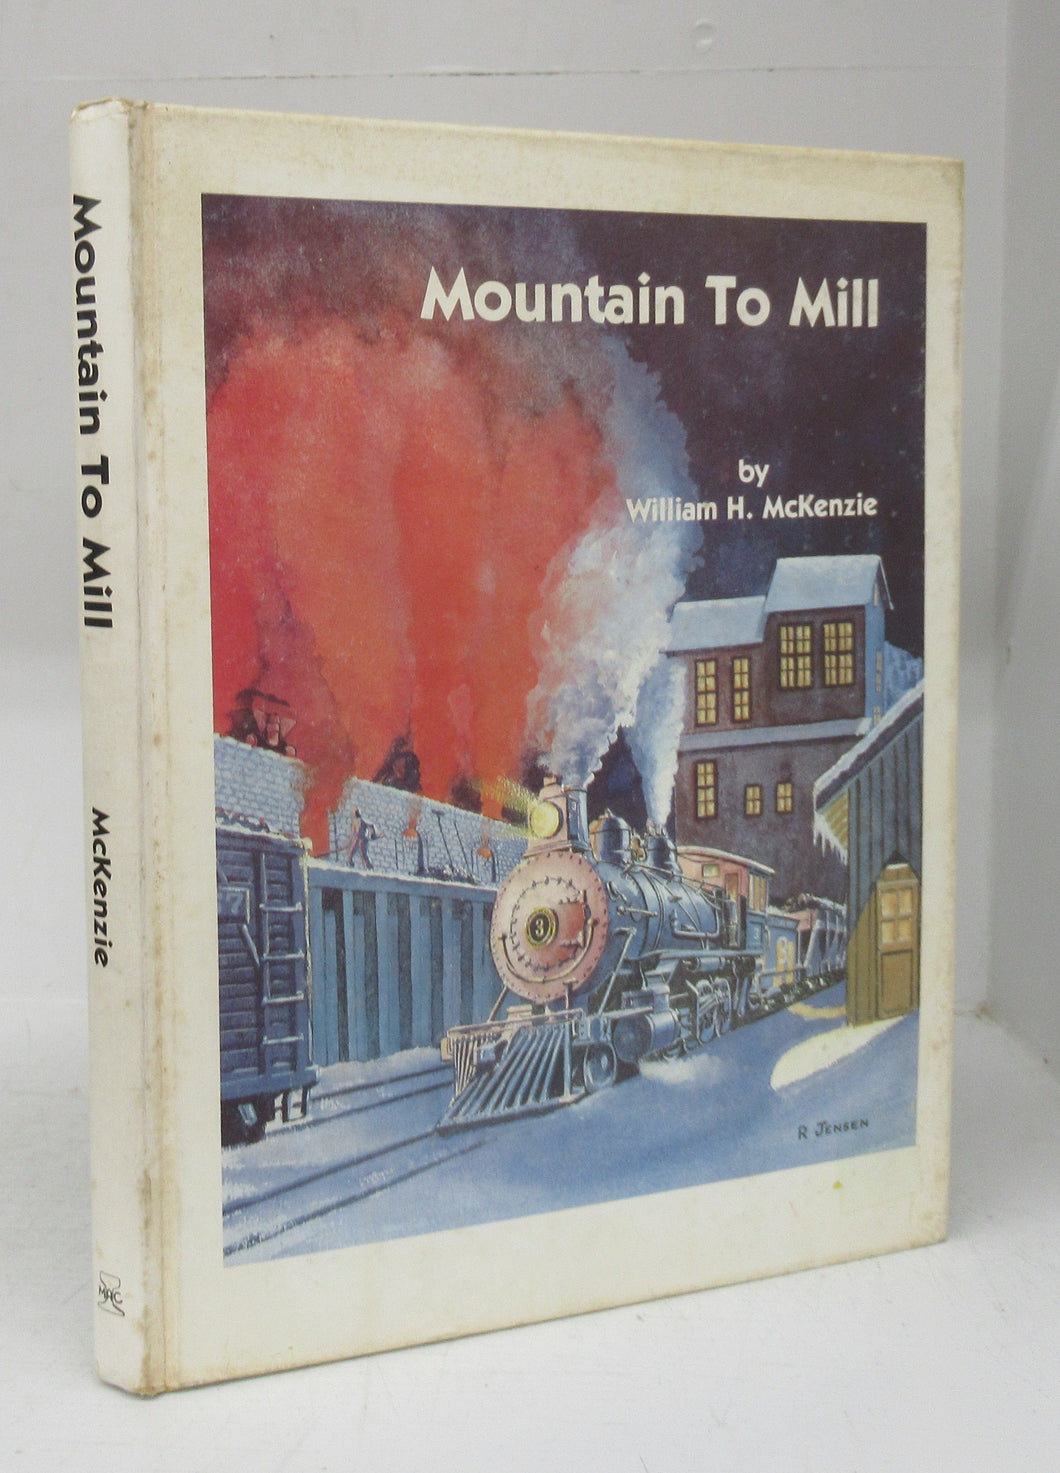 Mountain To Mill: The Colorado and Wyoming Railway